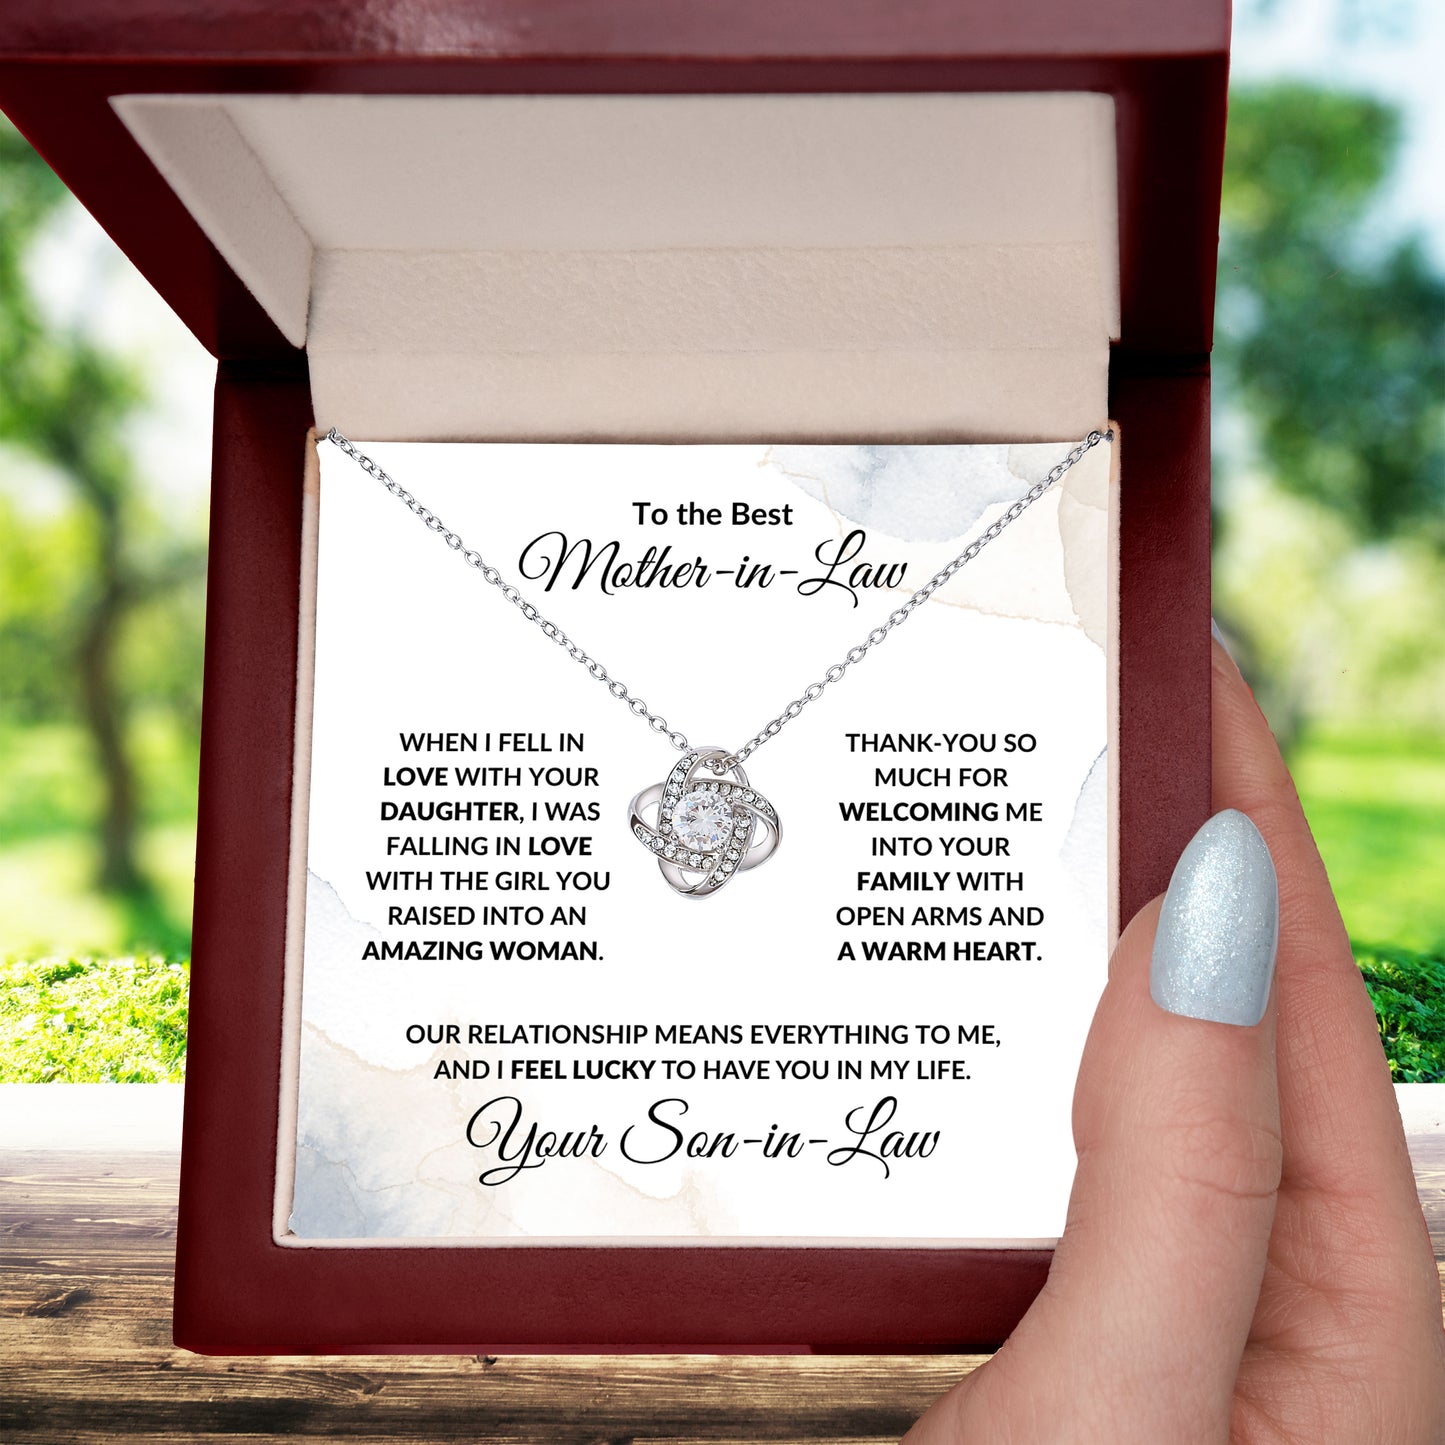 To the Best Mother-in-Law Love Knot Necklace Personalized From Son-in-Law